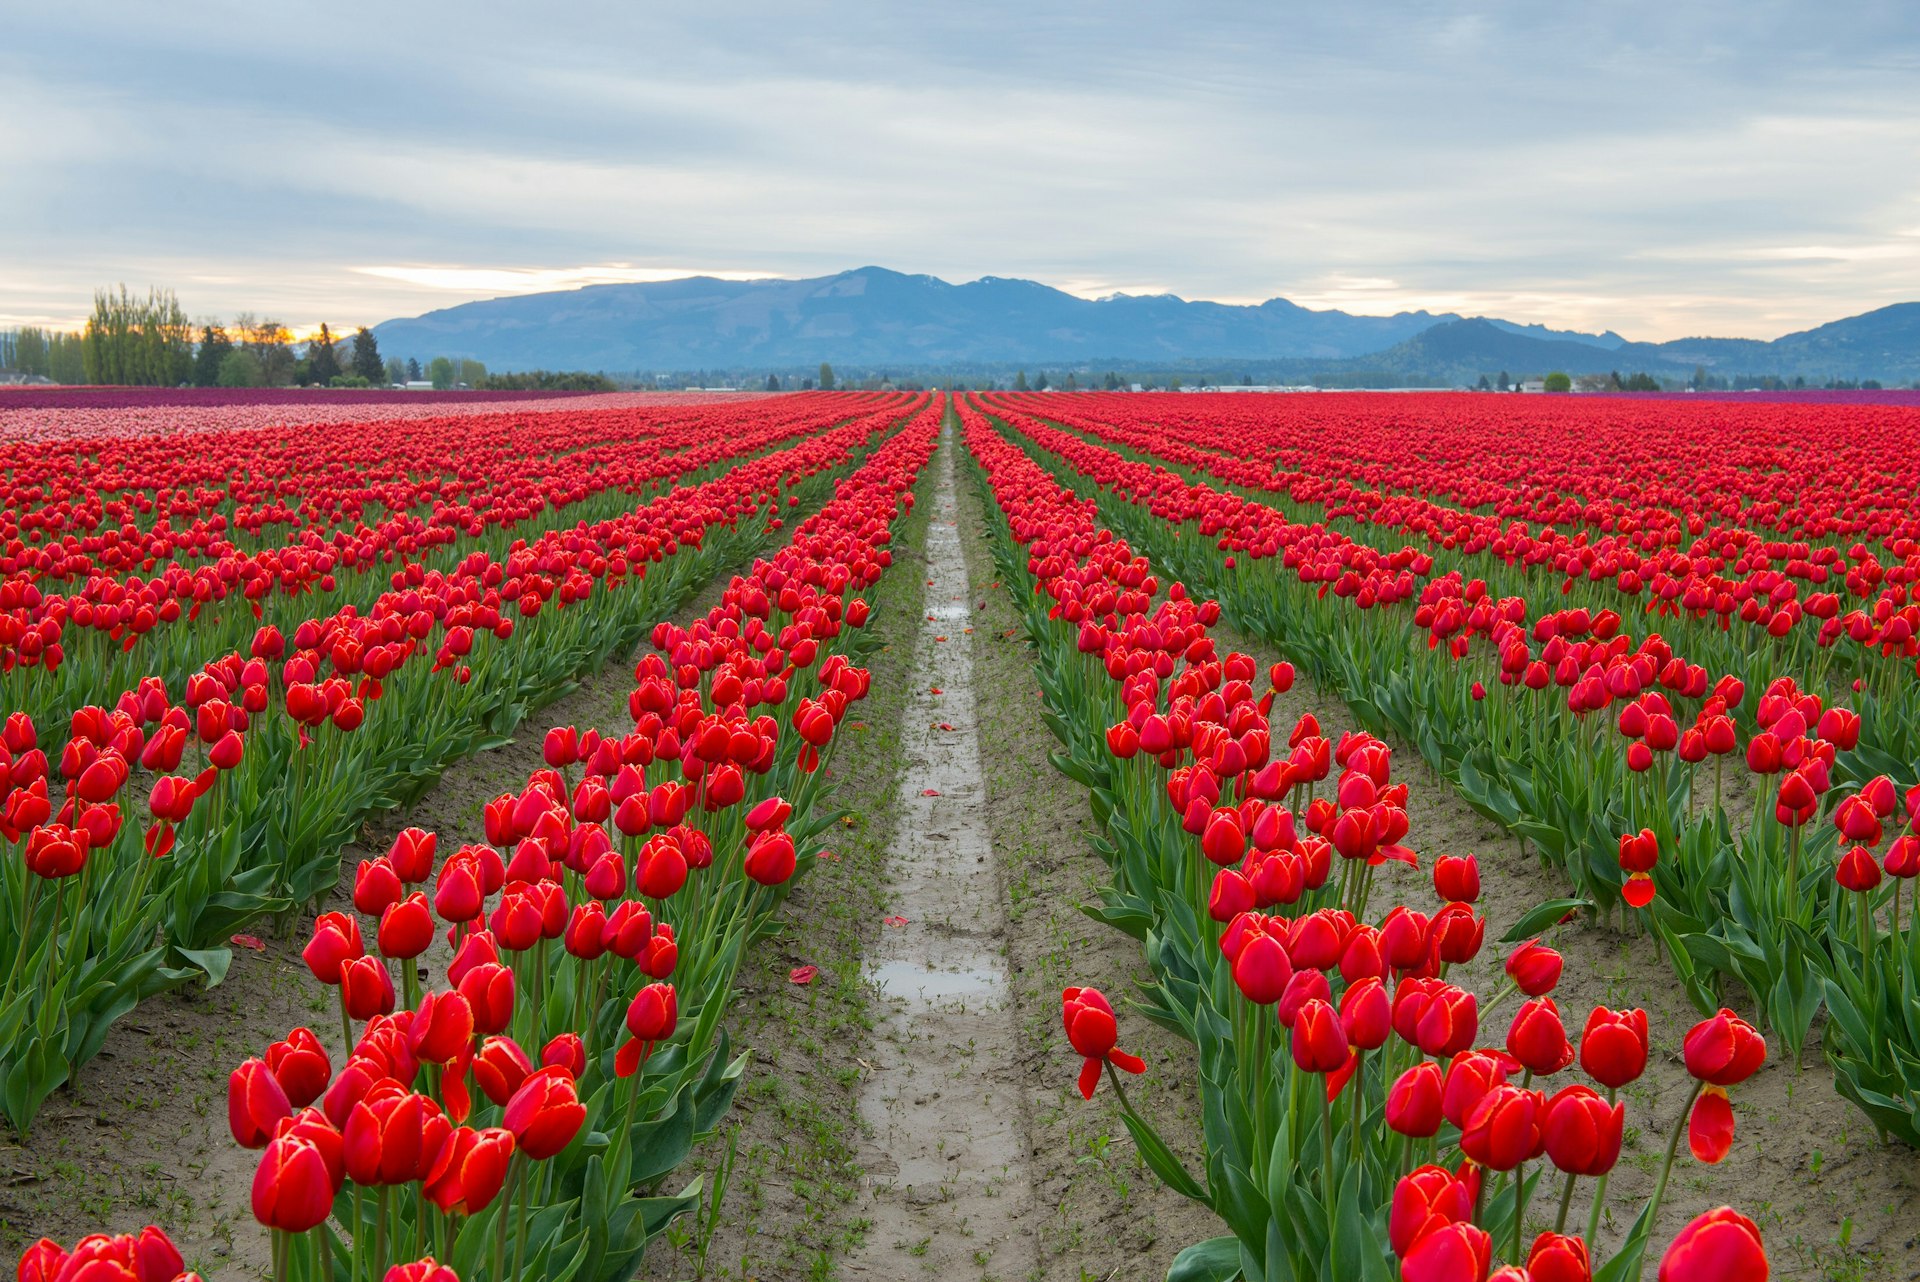 Rows Of Red Tulips In Washington State